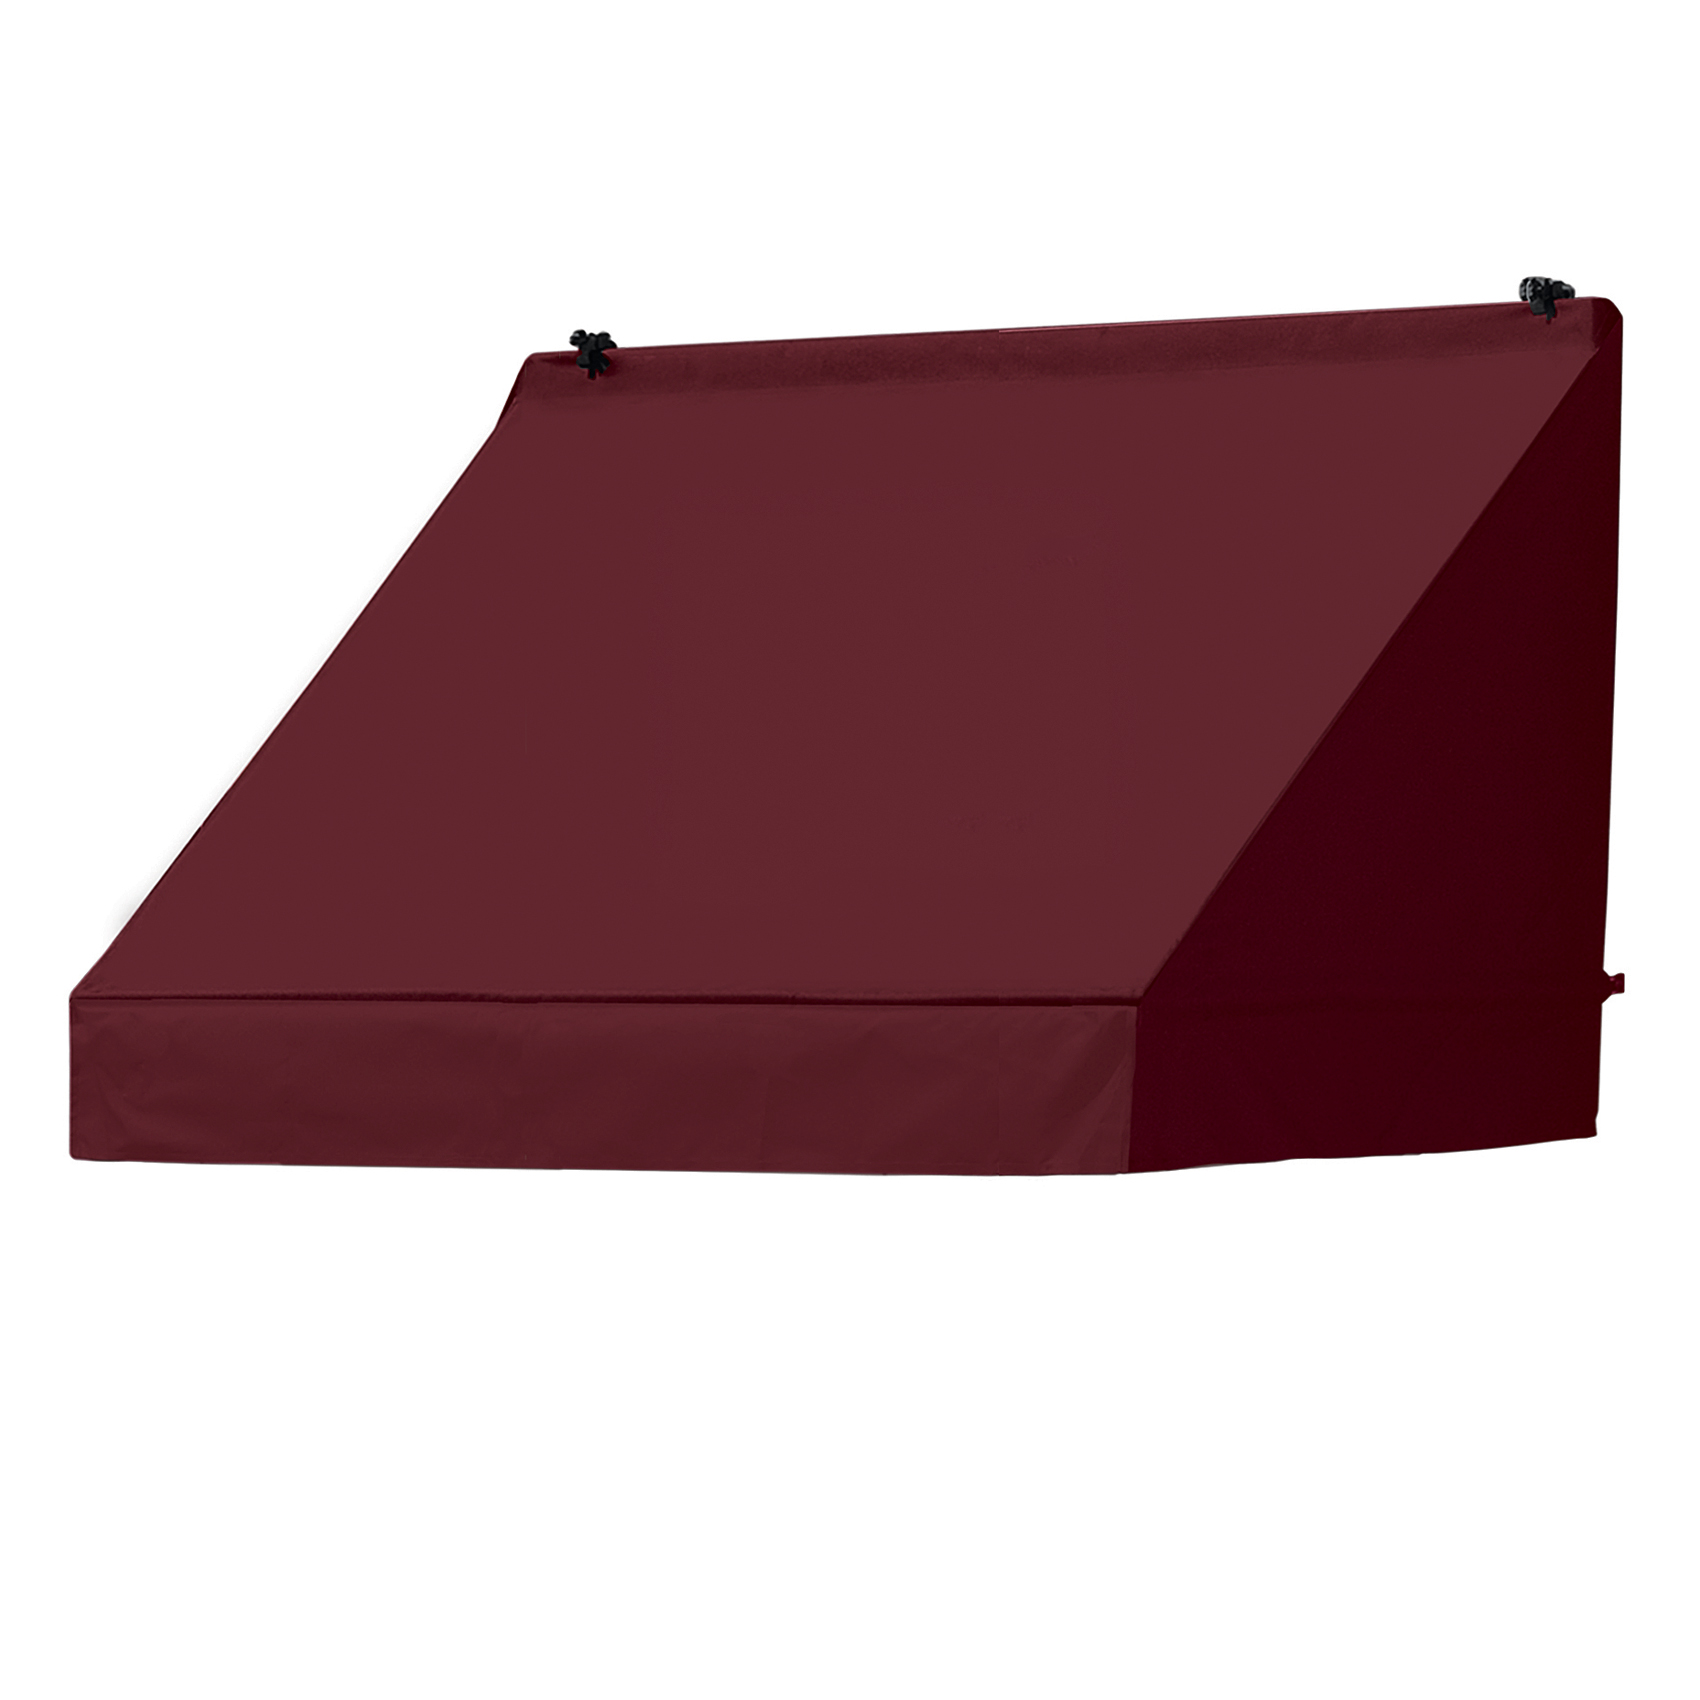 Awnings in a Box&reg; 4' Classic Style in Assorted Colors